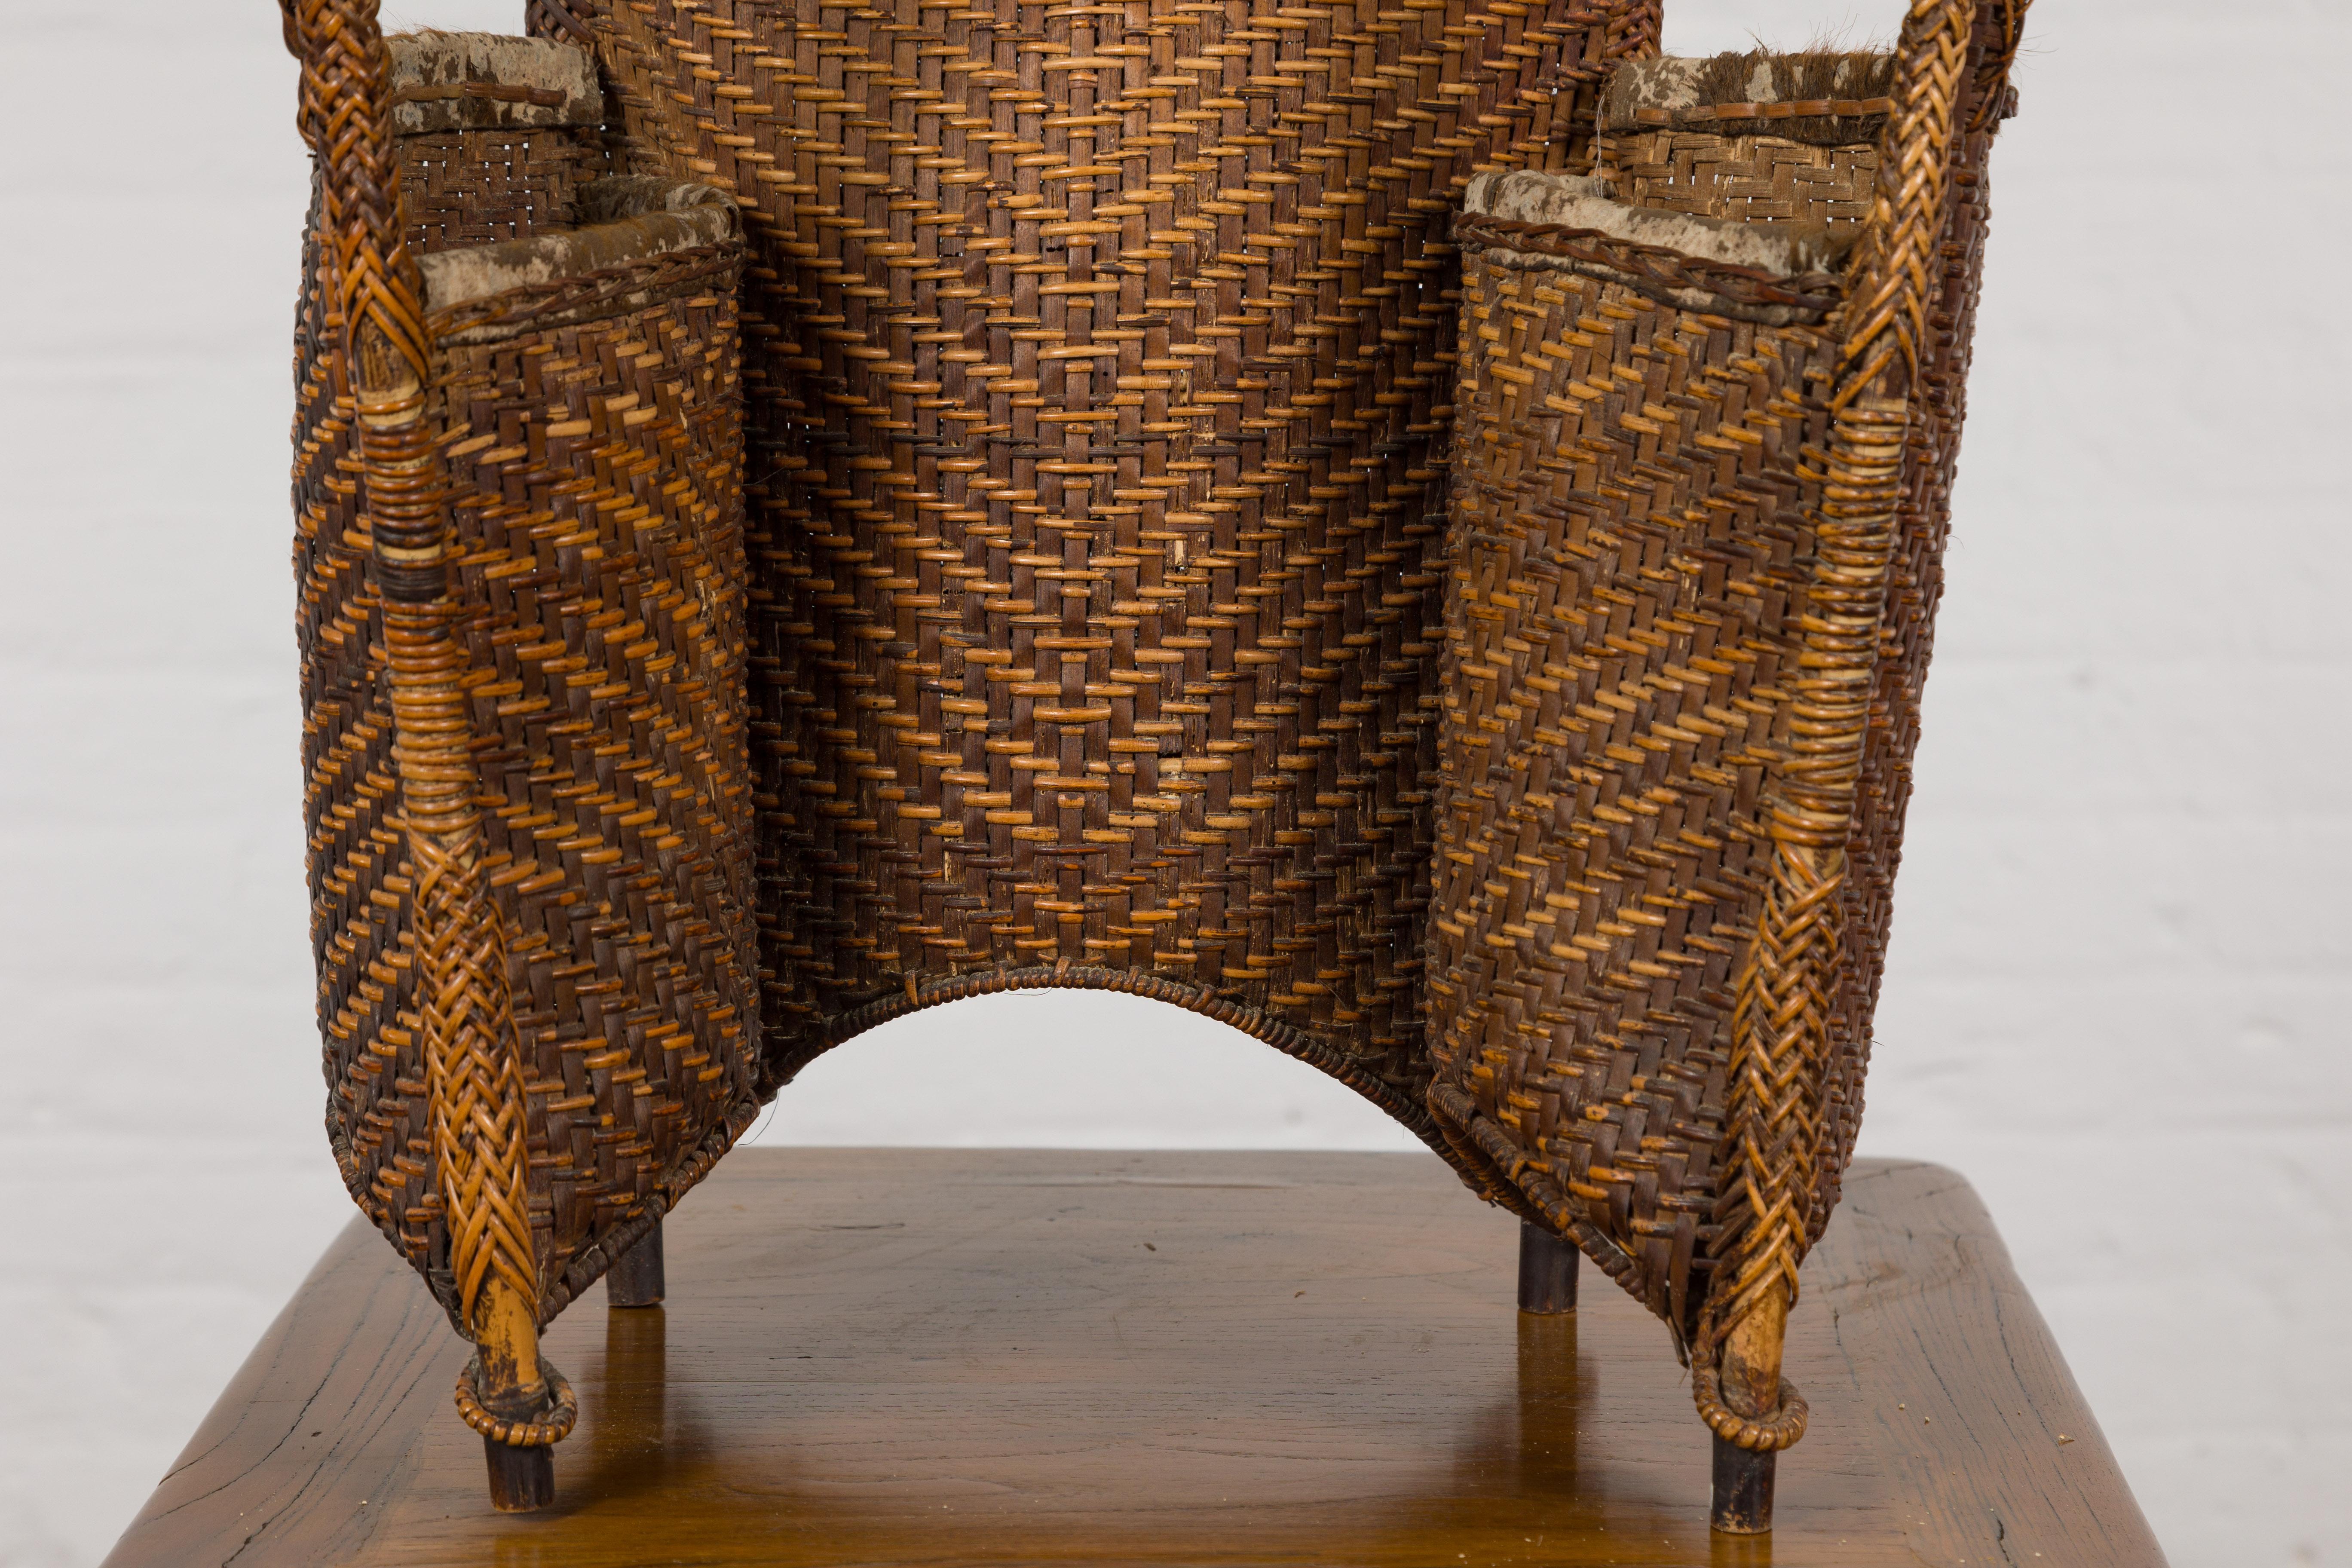 19th Century Tribal Handwoven Rattan Backpack with Inner Pockets For Sale 6